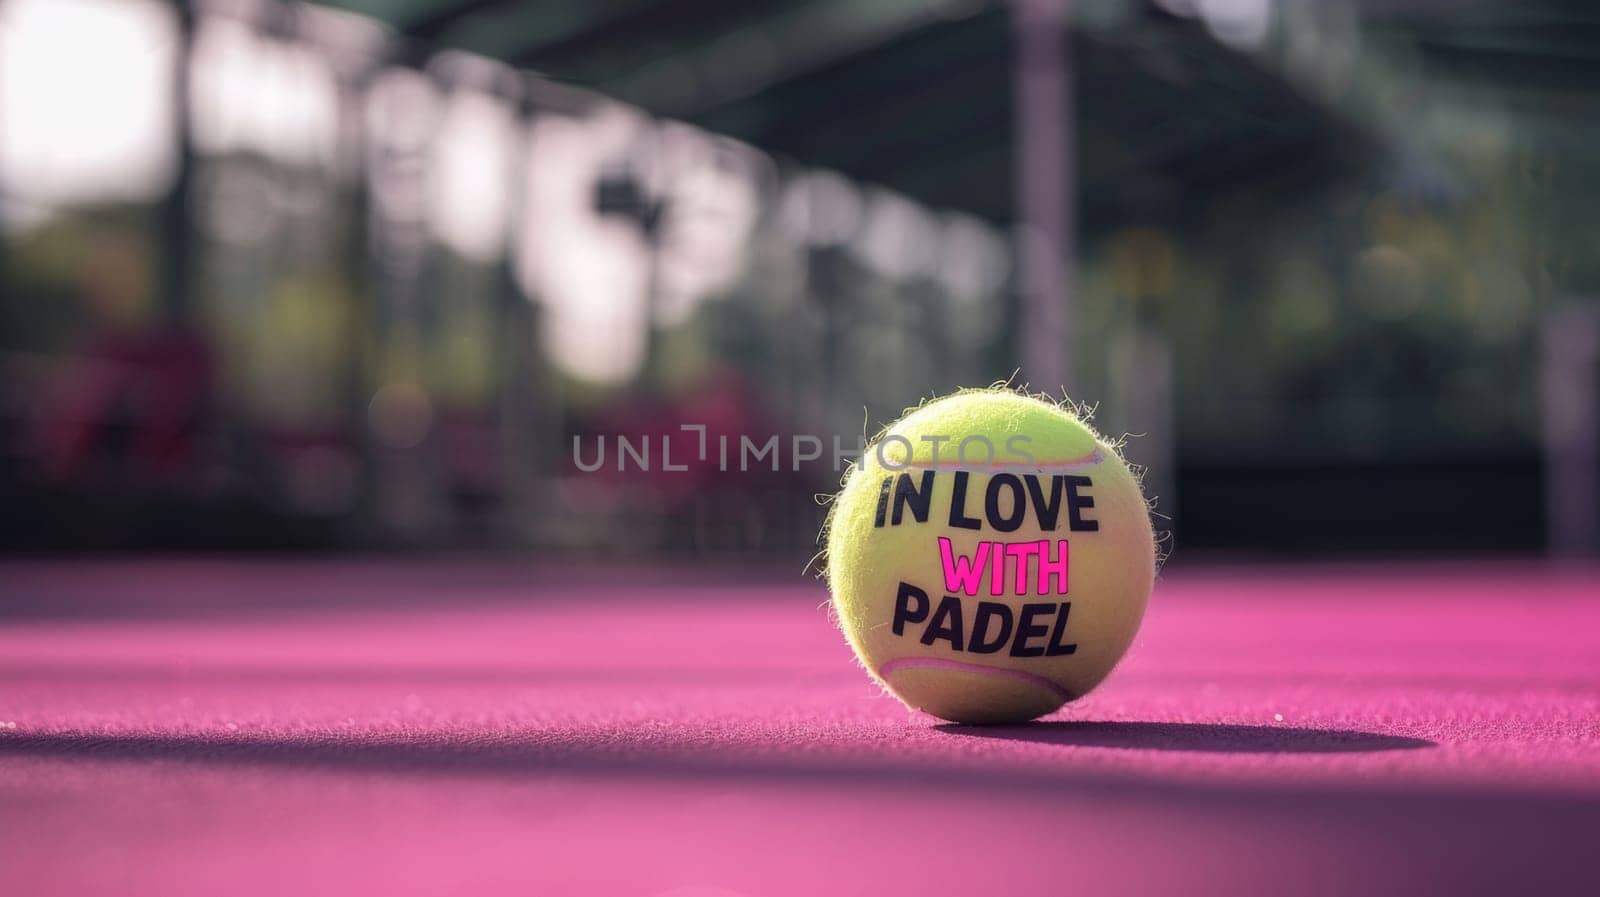 Low angle close up view of a padel ball with the words "in love with padel" written on it.